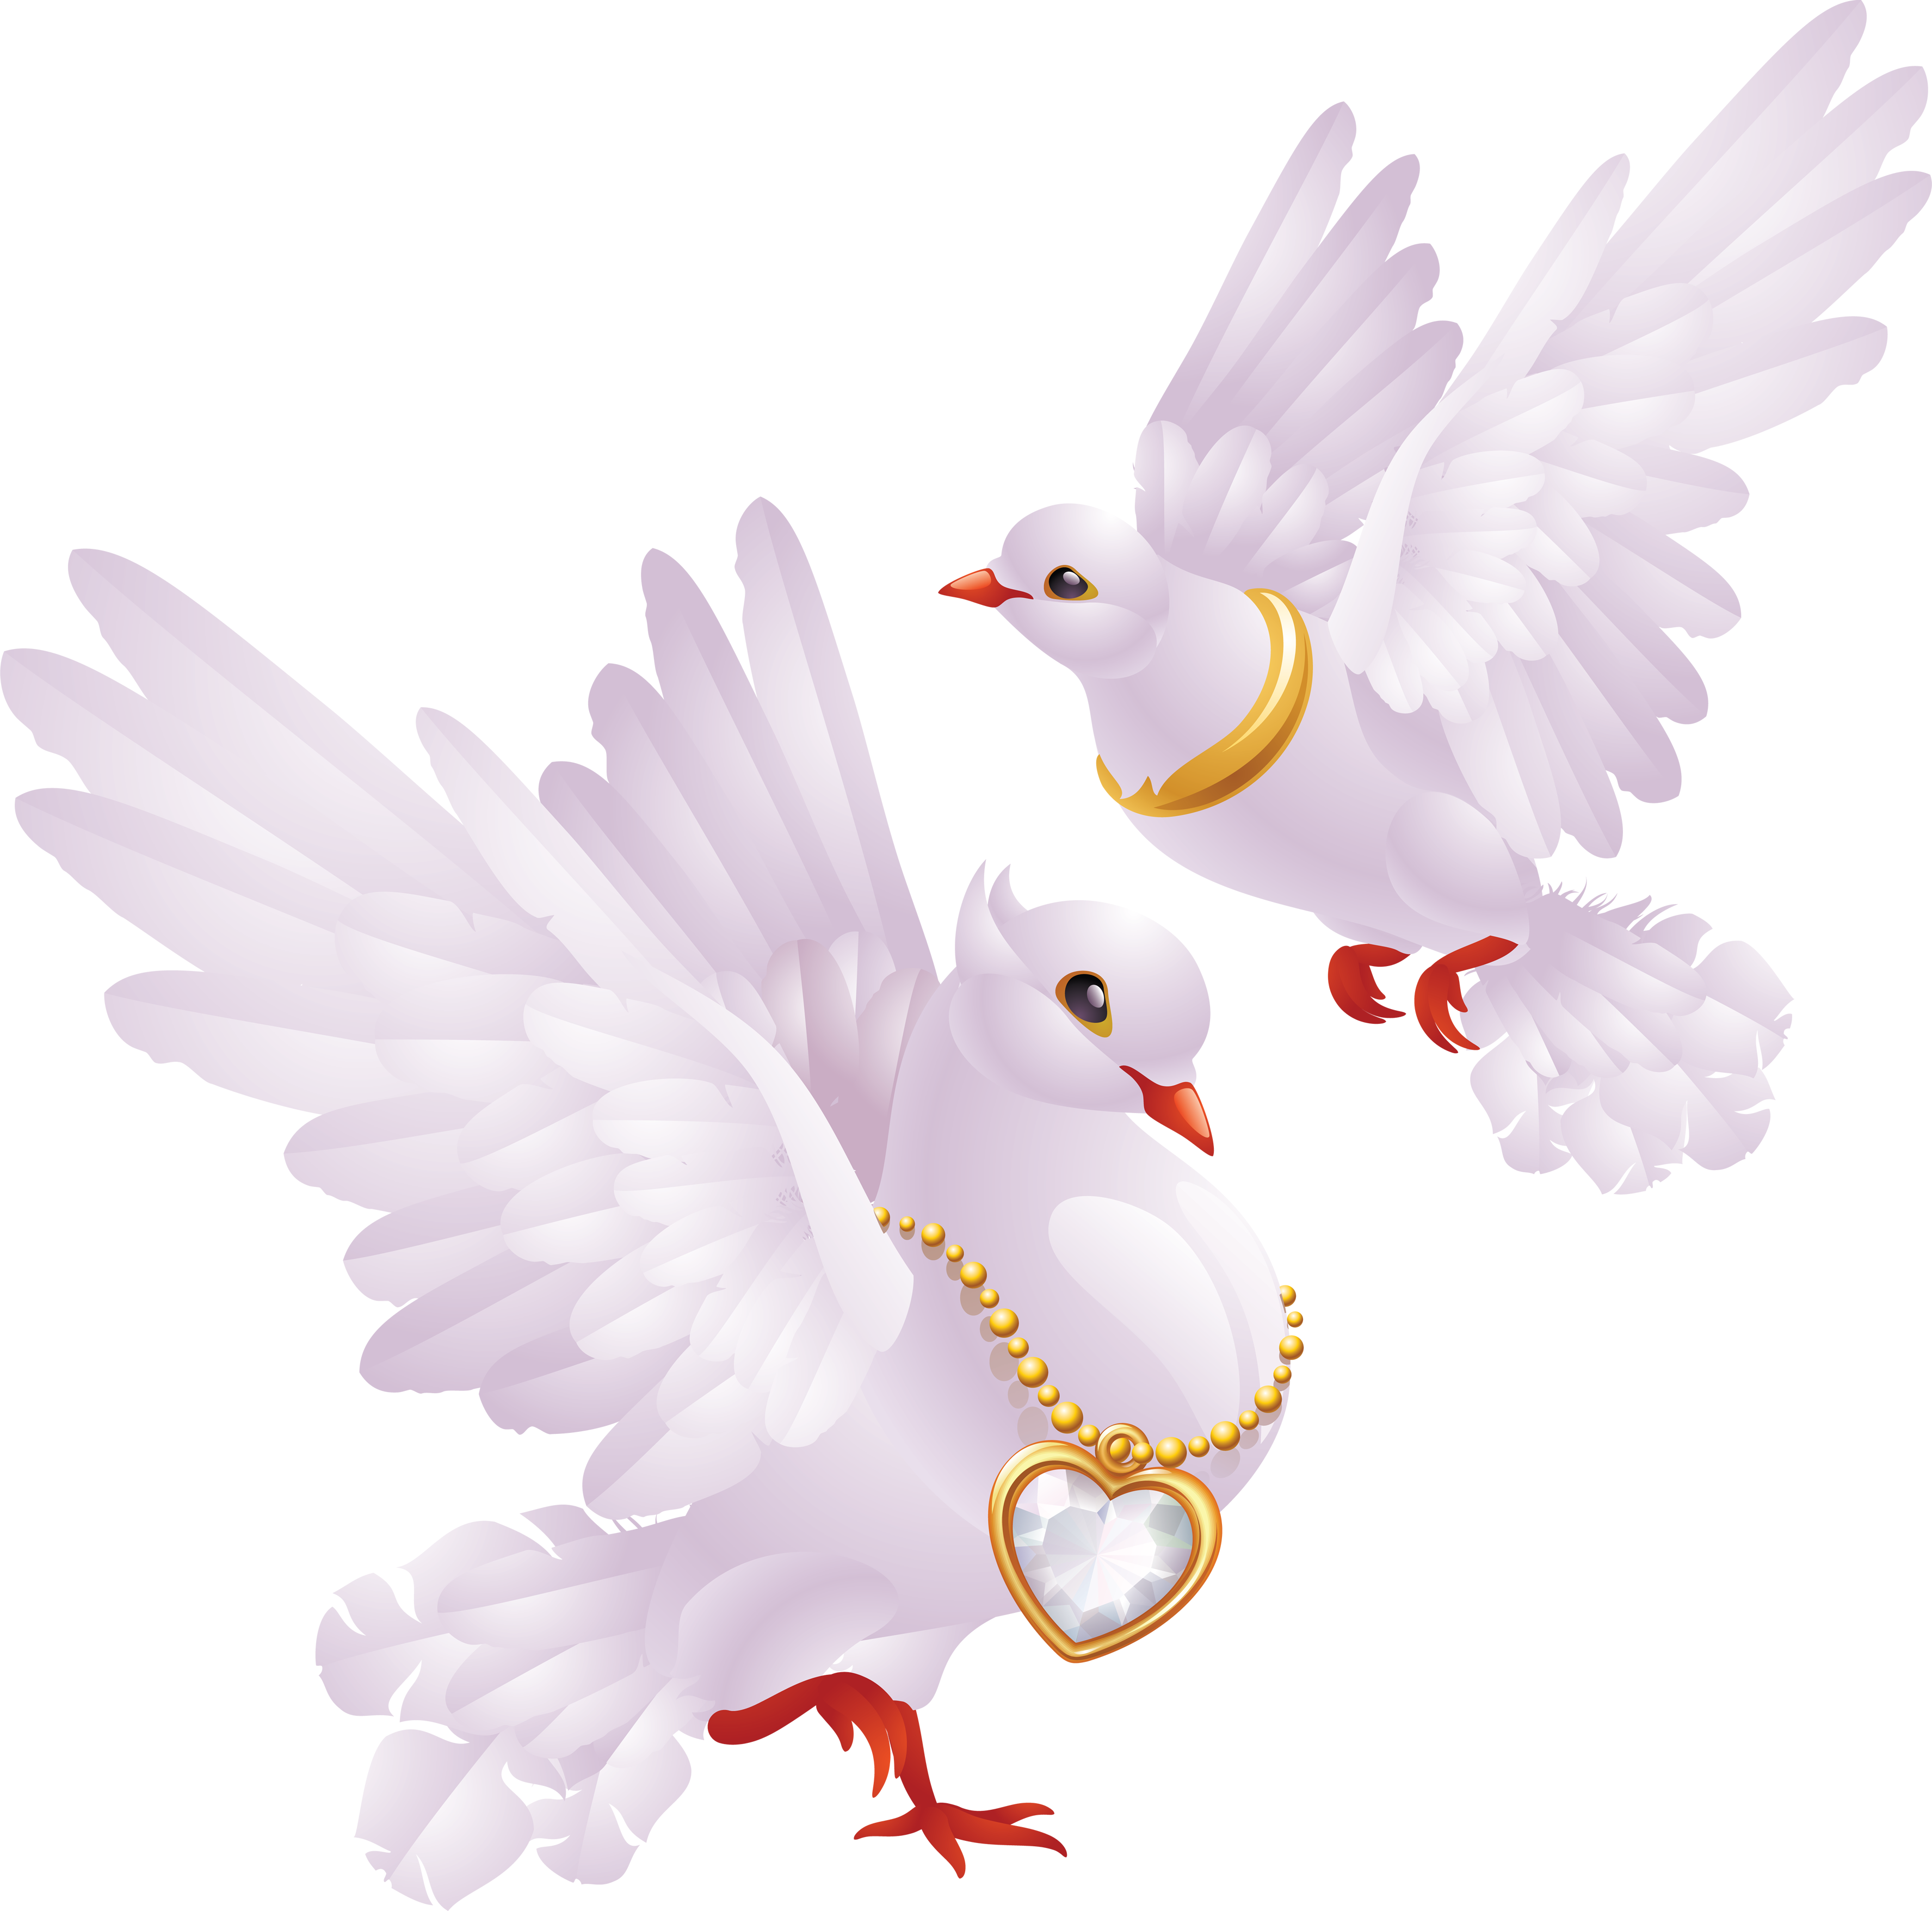 Pigeon clipart paloma. Pin by aynur bobaro